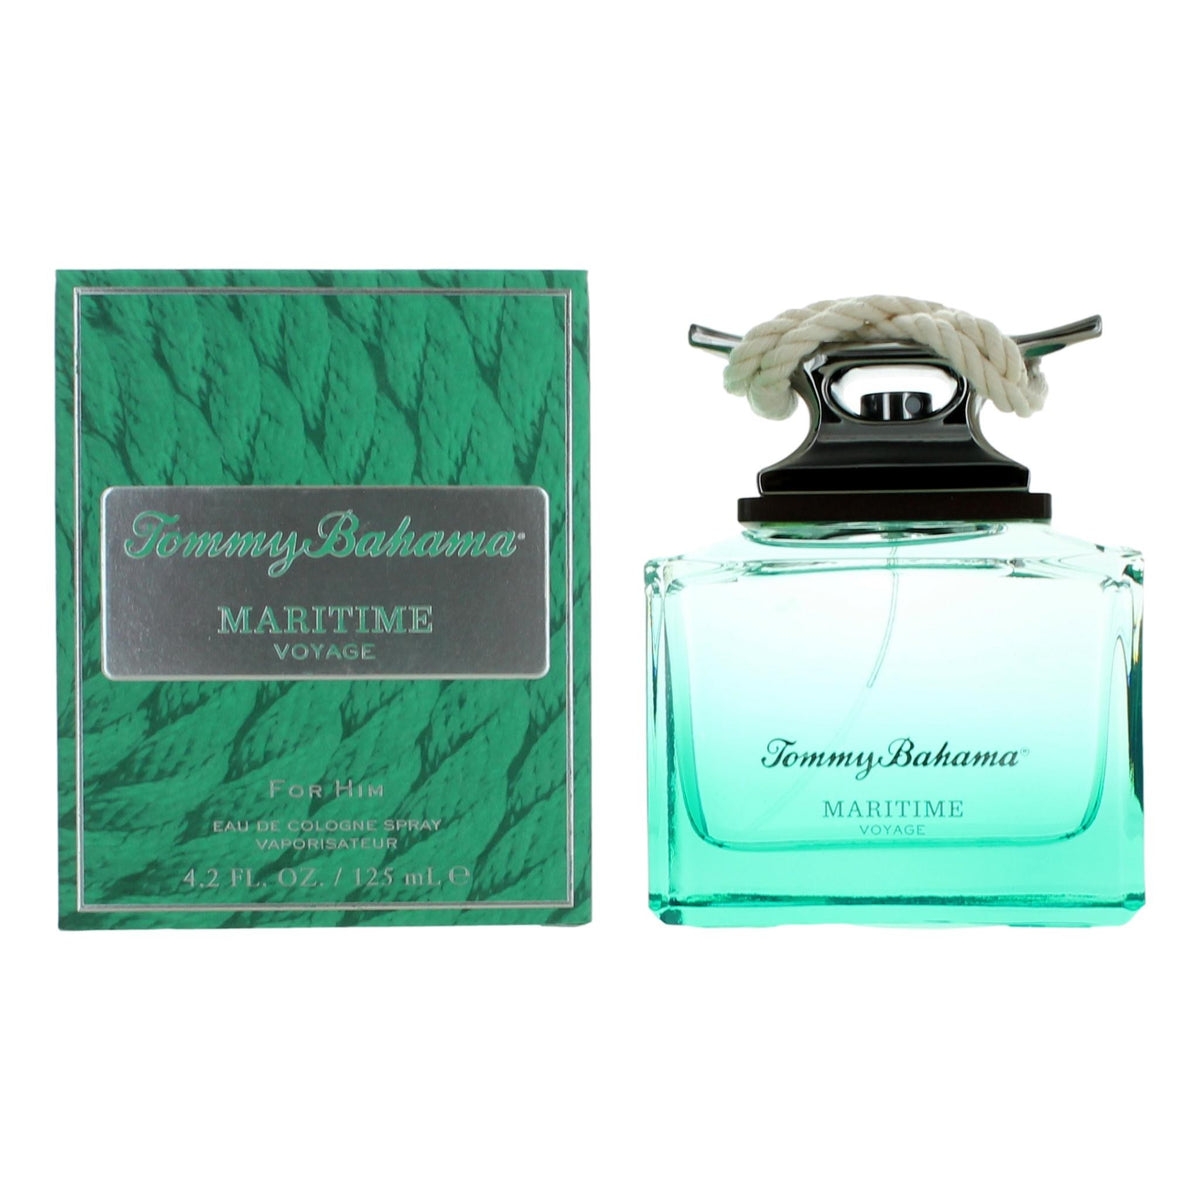 Tommy Bahama Maritime Voyage by Tommy Bahama, 4.2 oz Eau De Cologne Spray for Men